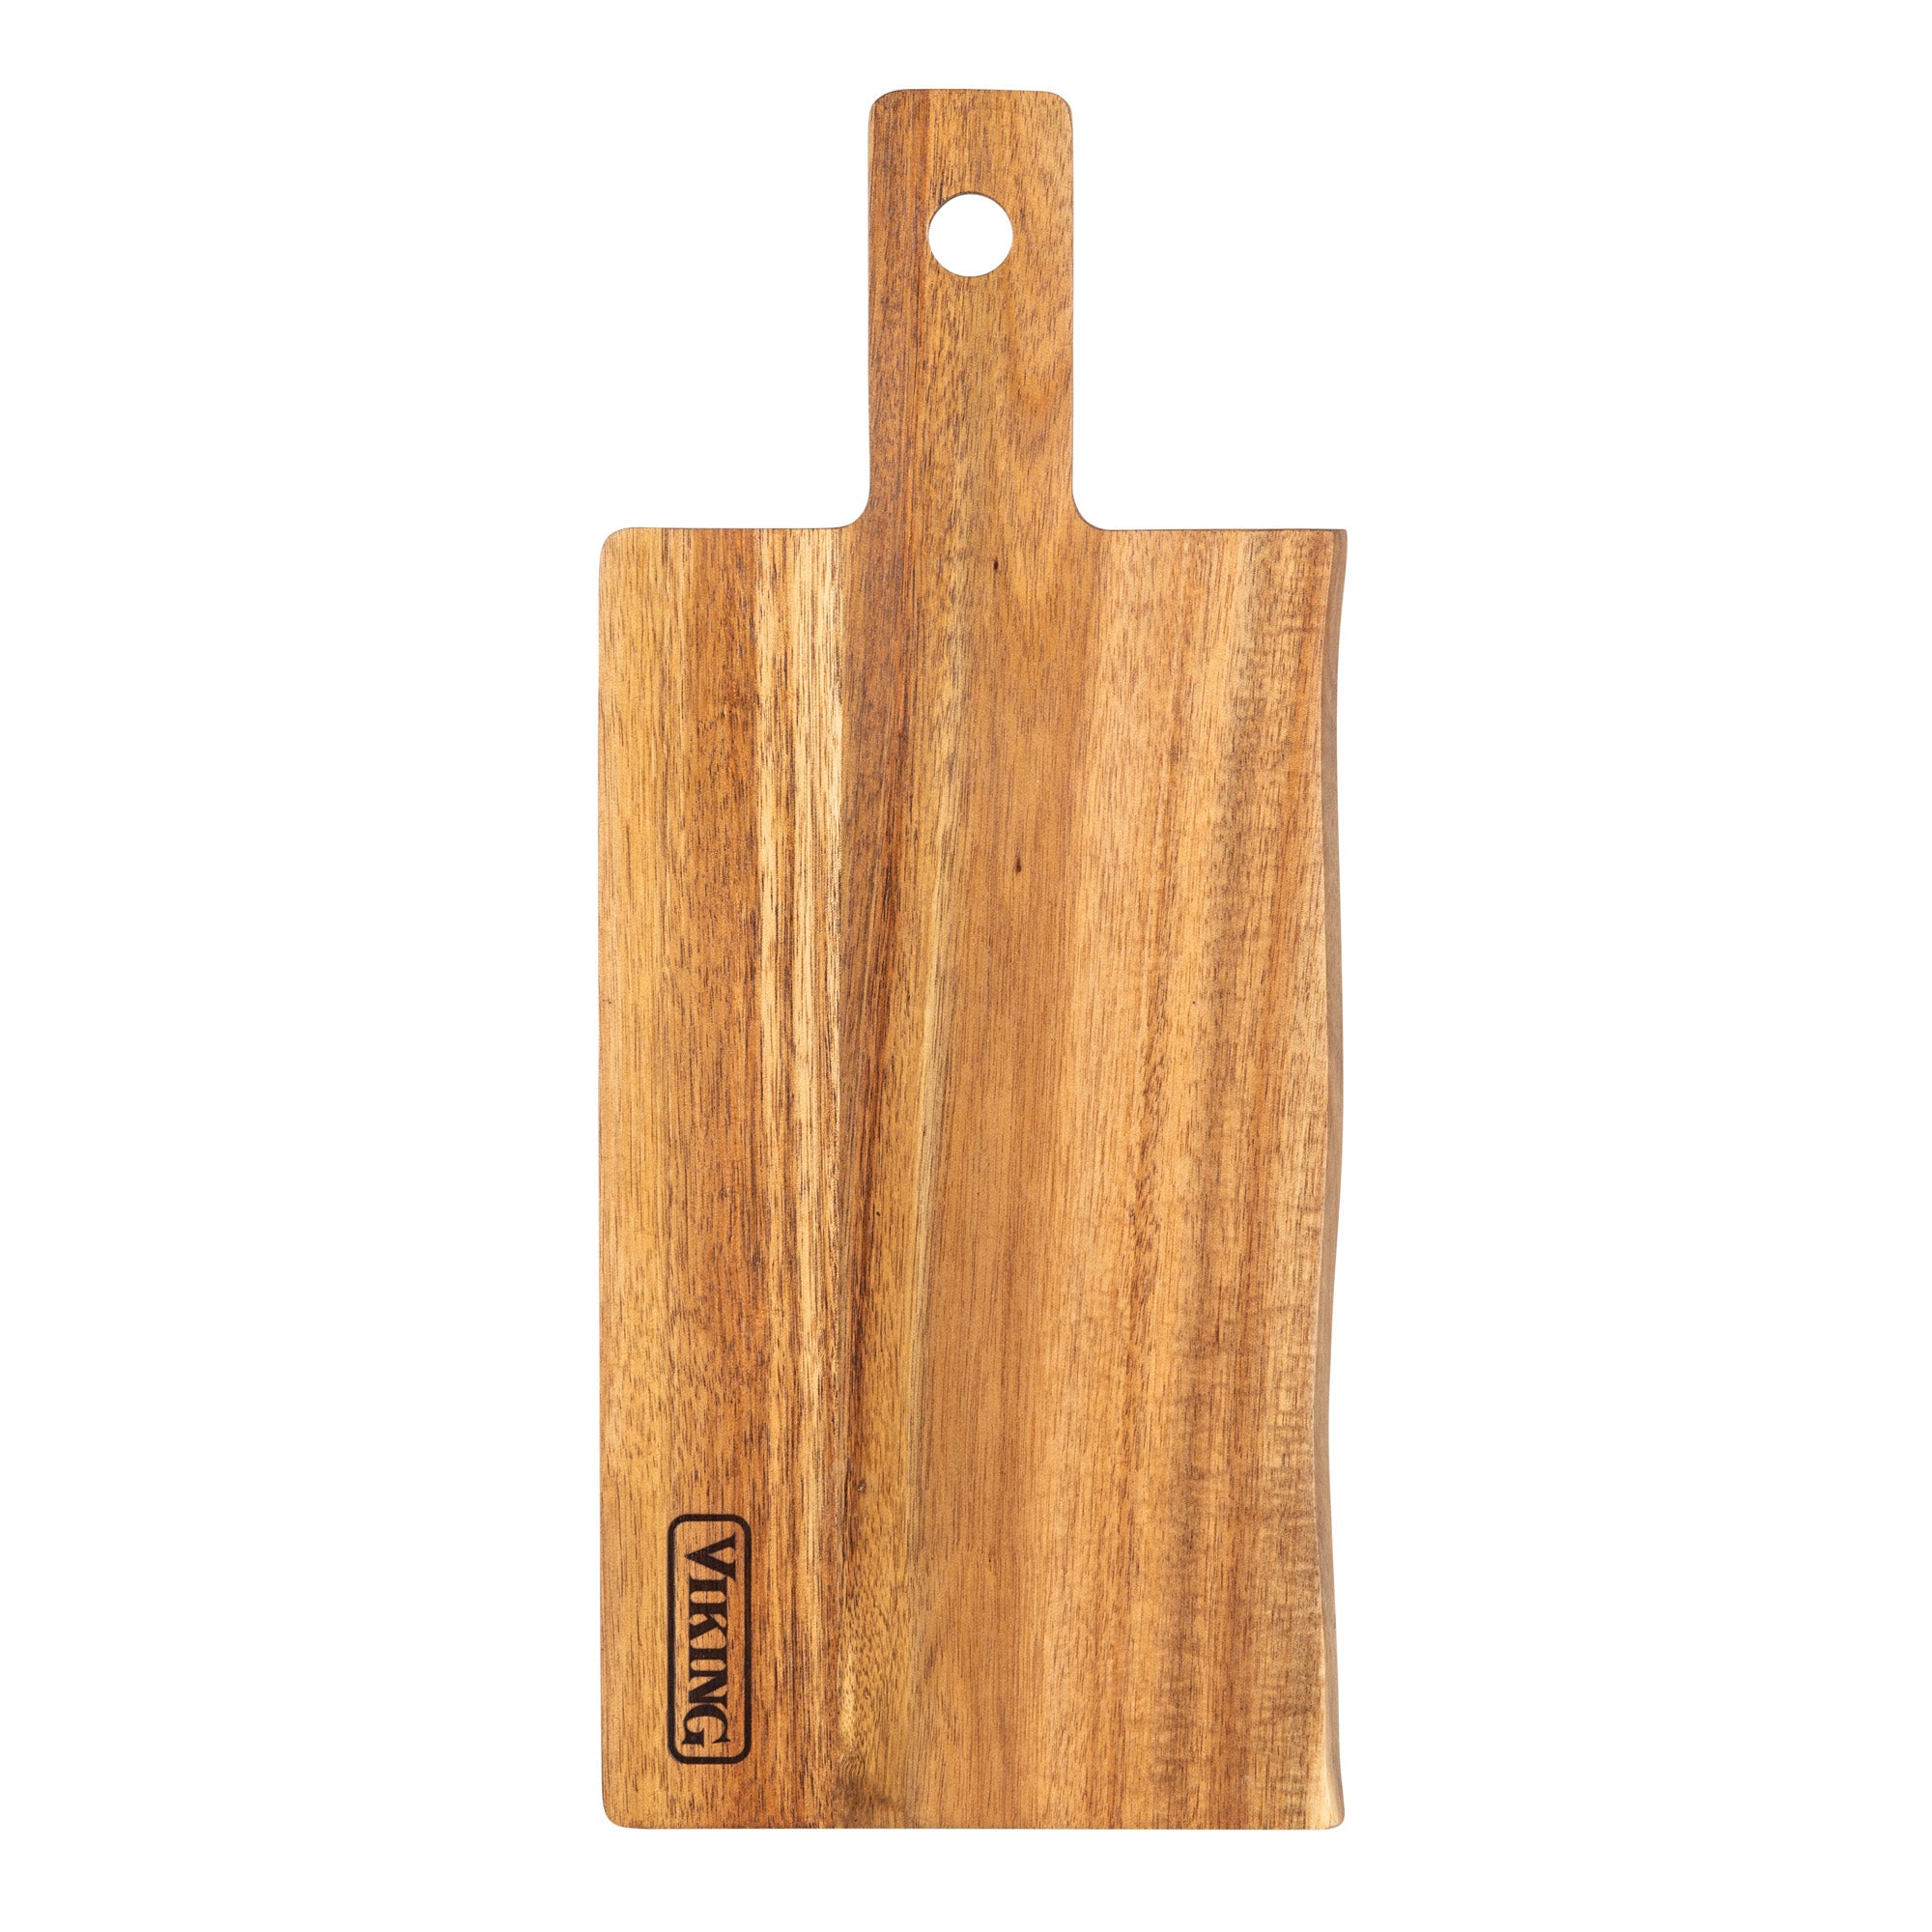 Viking Acacia Carving Board with Juice Well and Metal Handle – Viking  Culinary Products